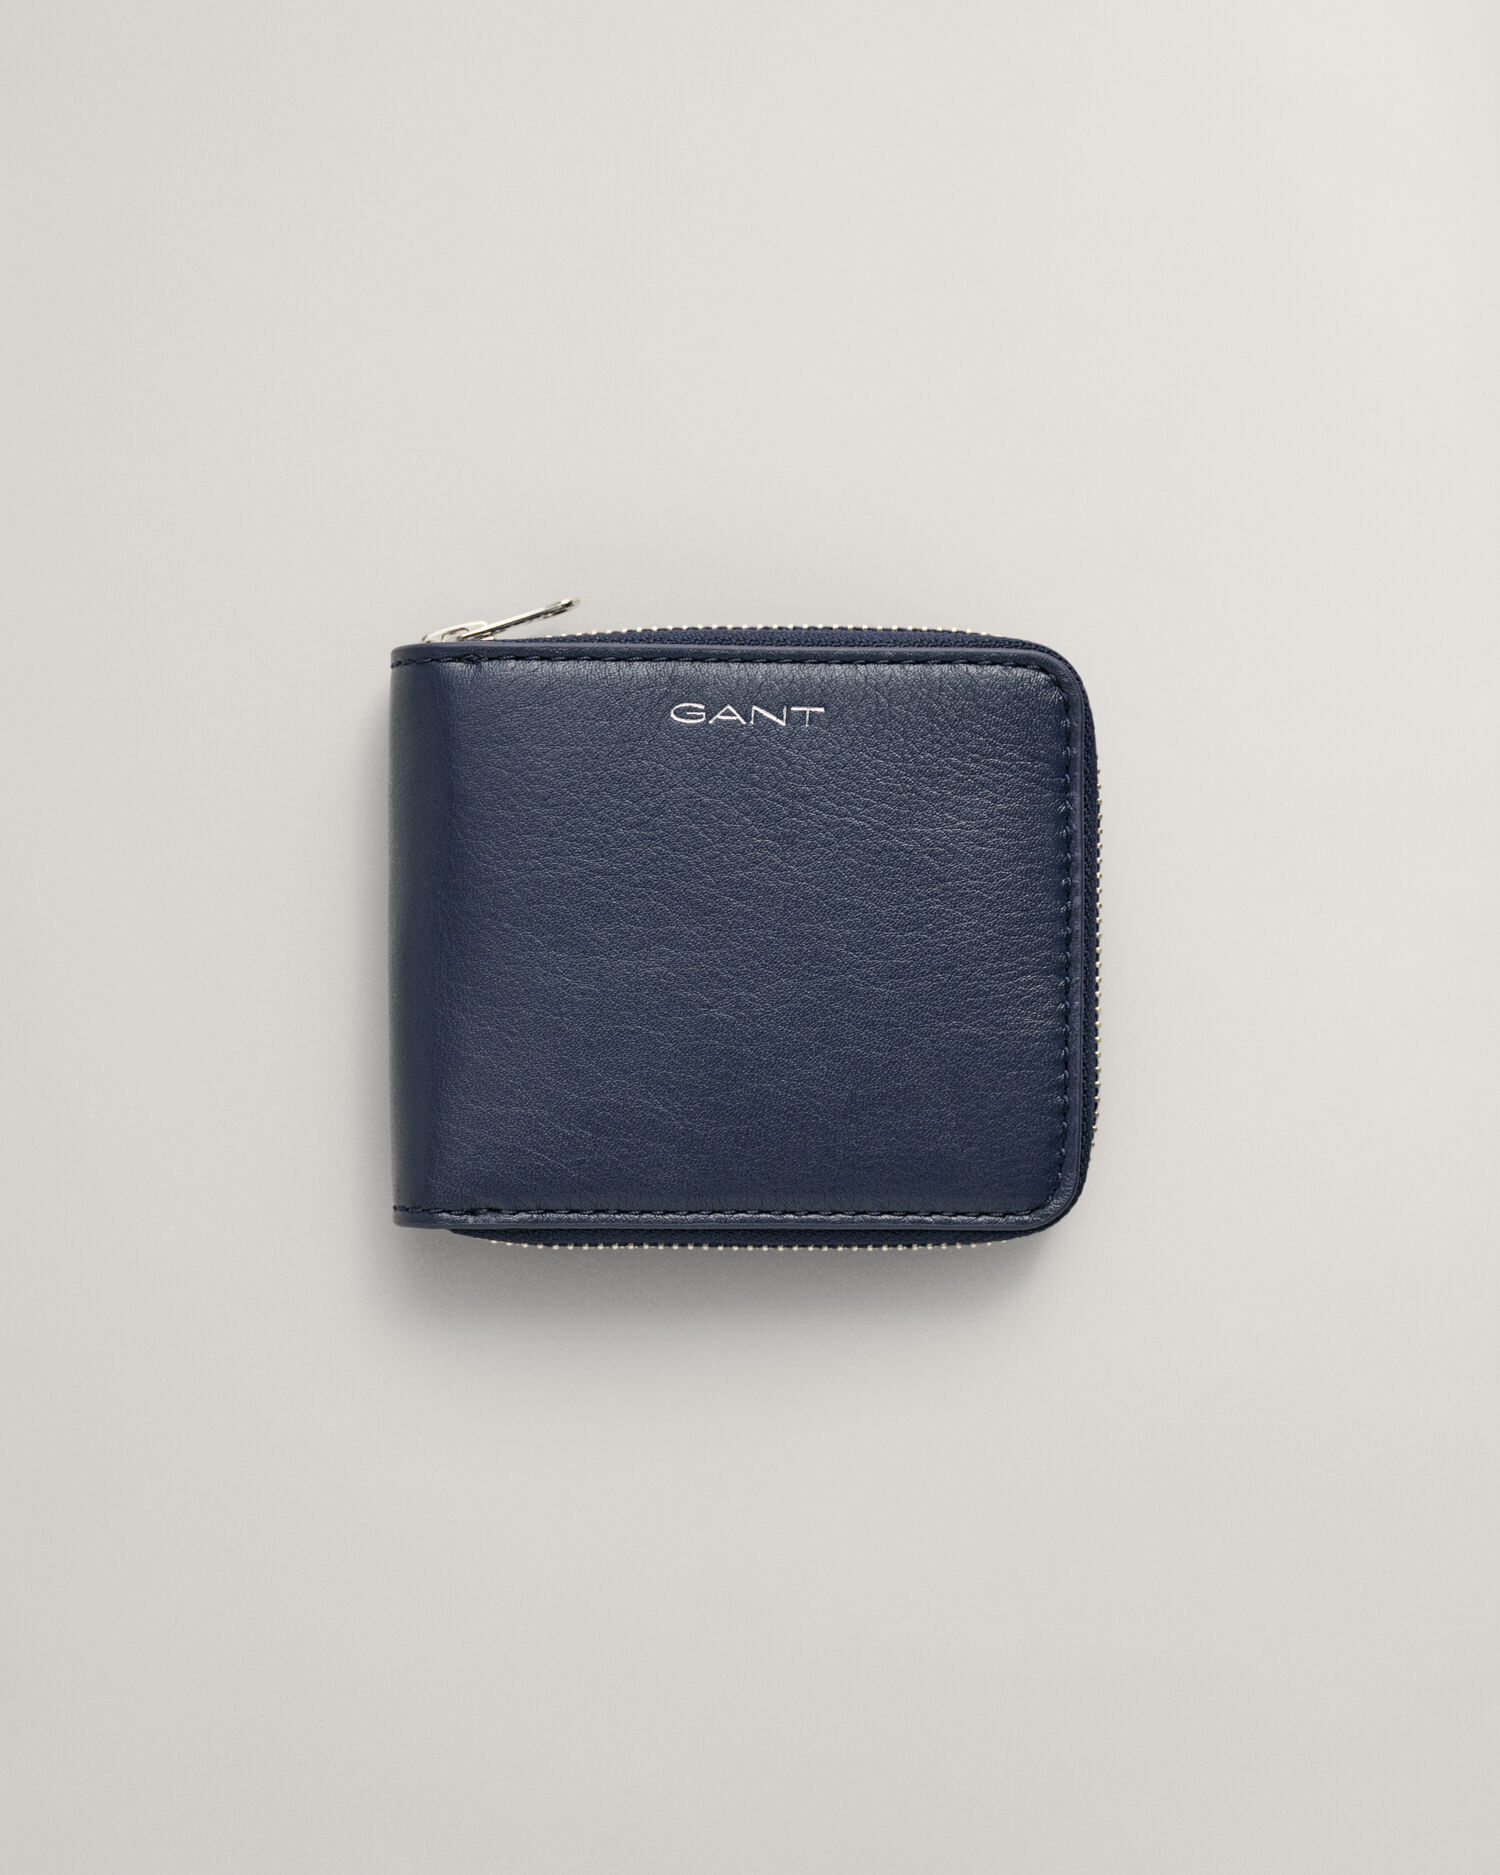 Buy Genuine Leather RFID Zip Around Wallet For Boys, Coin Pocket Trendy  Premium Blue Leather Zip Wallet Online In India At Discounted Prices